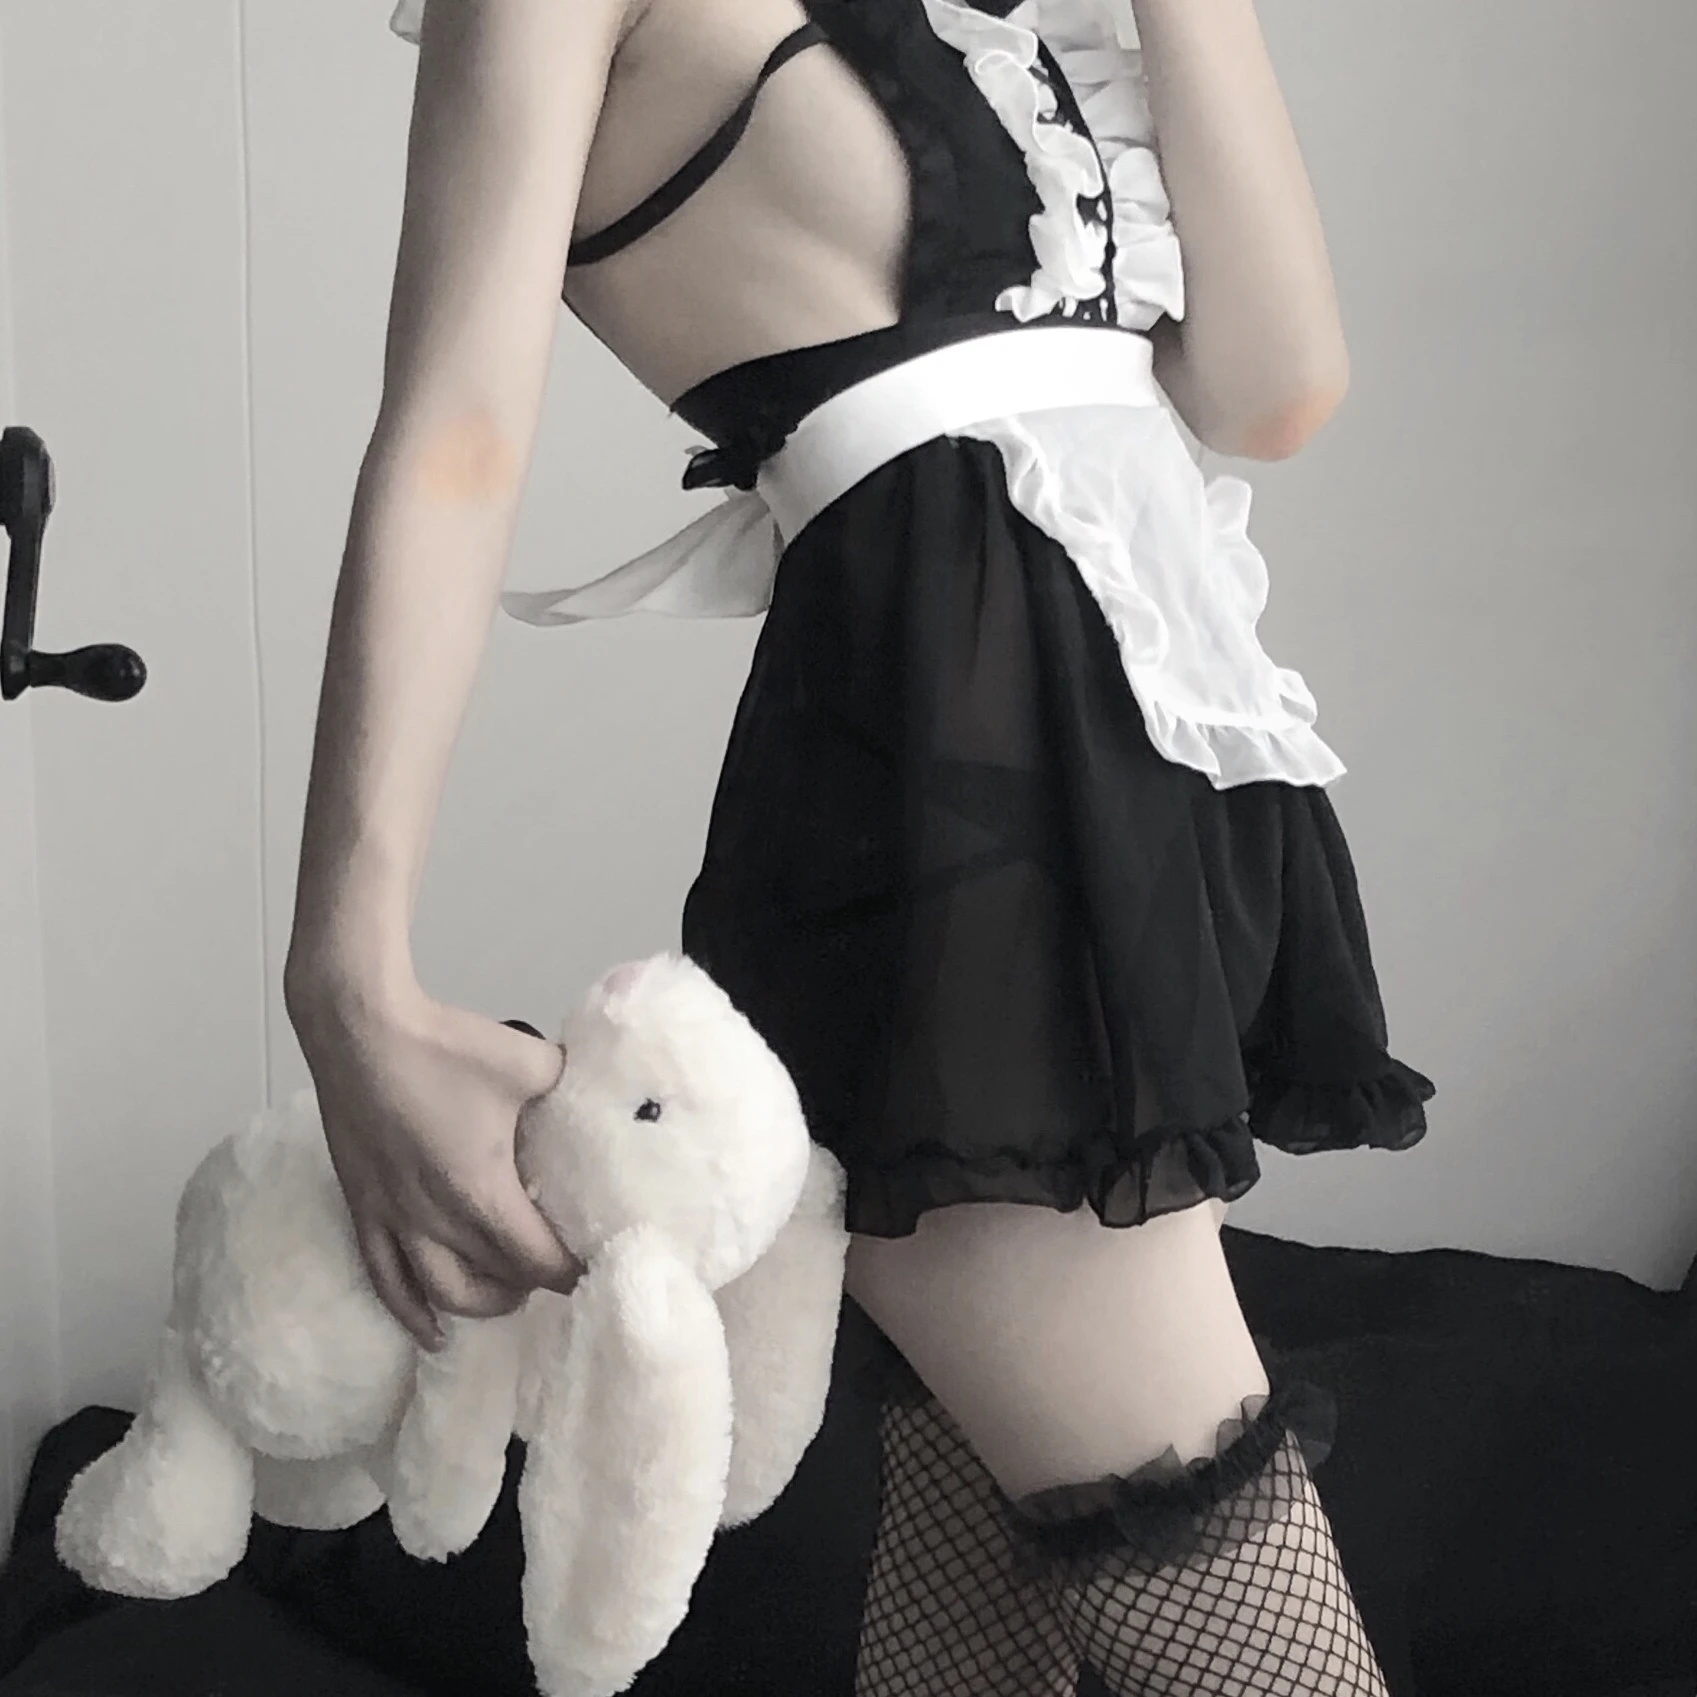 

Cute Apron Cos Maid Wears Uniform Sexy Lingerie Cosplay French Servant Lolita Hot Costume Babydoll Dress Erotic Role Play